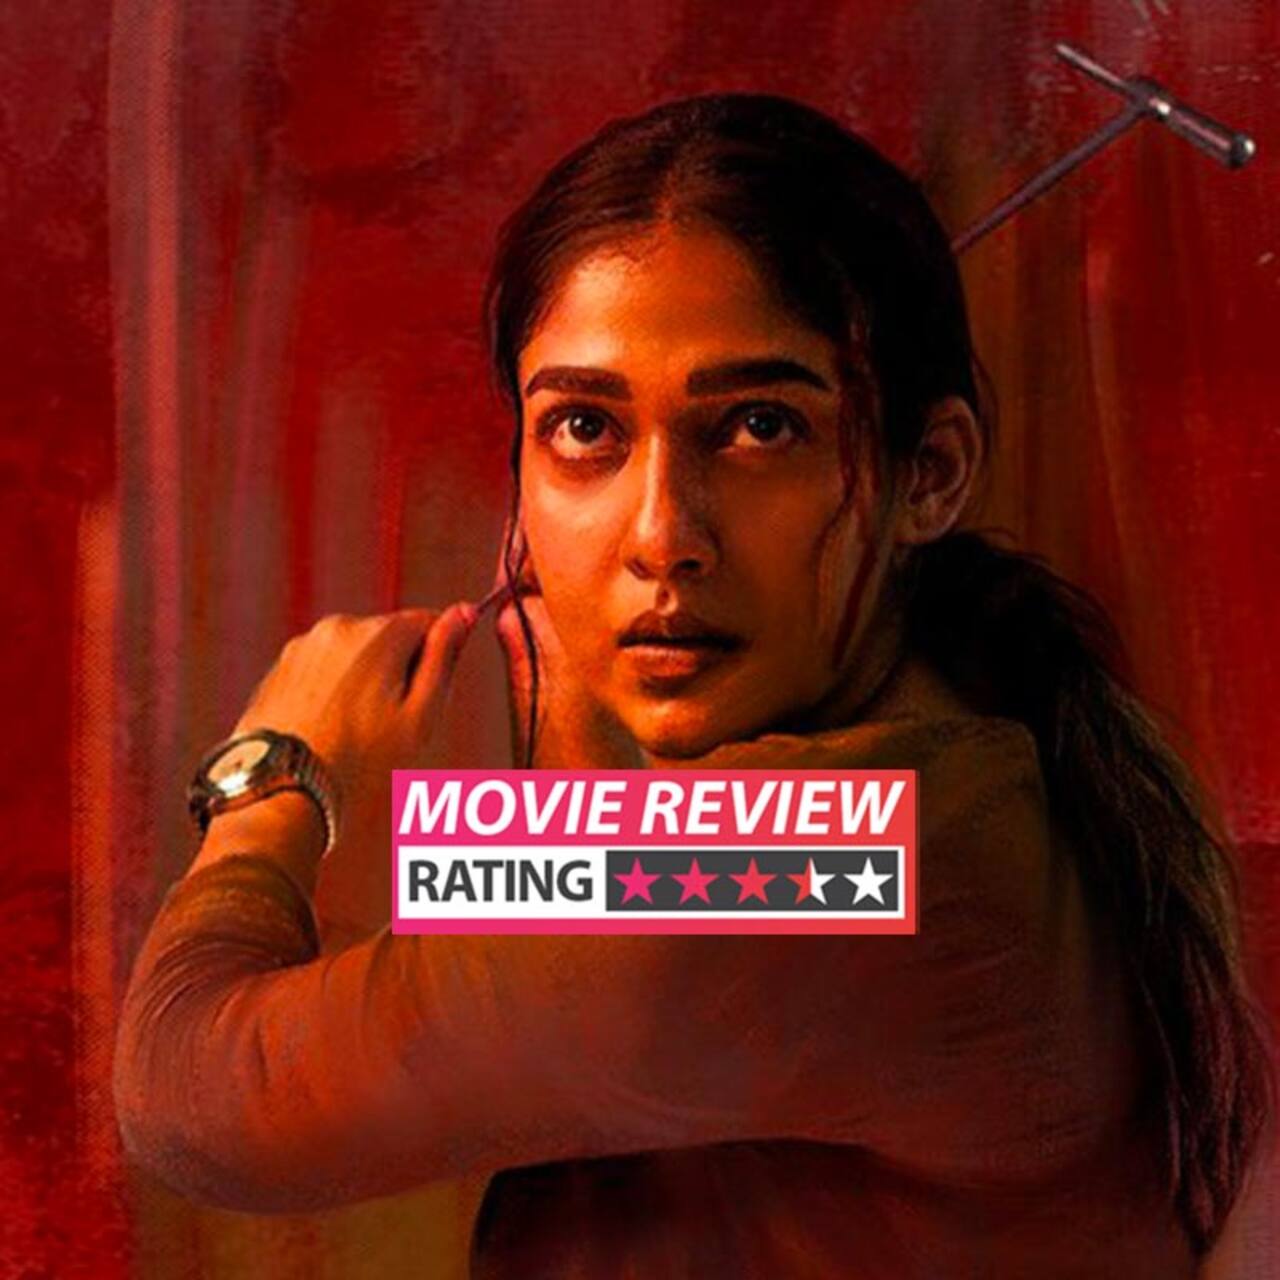 Netrikann movie review: Nayanthara is first rate as a blind woman in this gripping thriller that loses a bit of steam in its final act